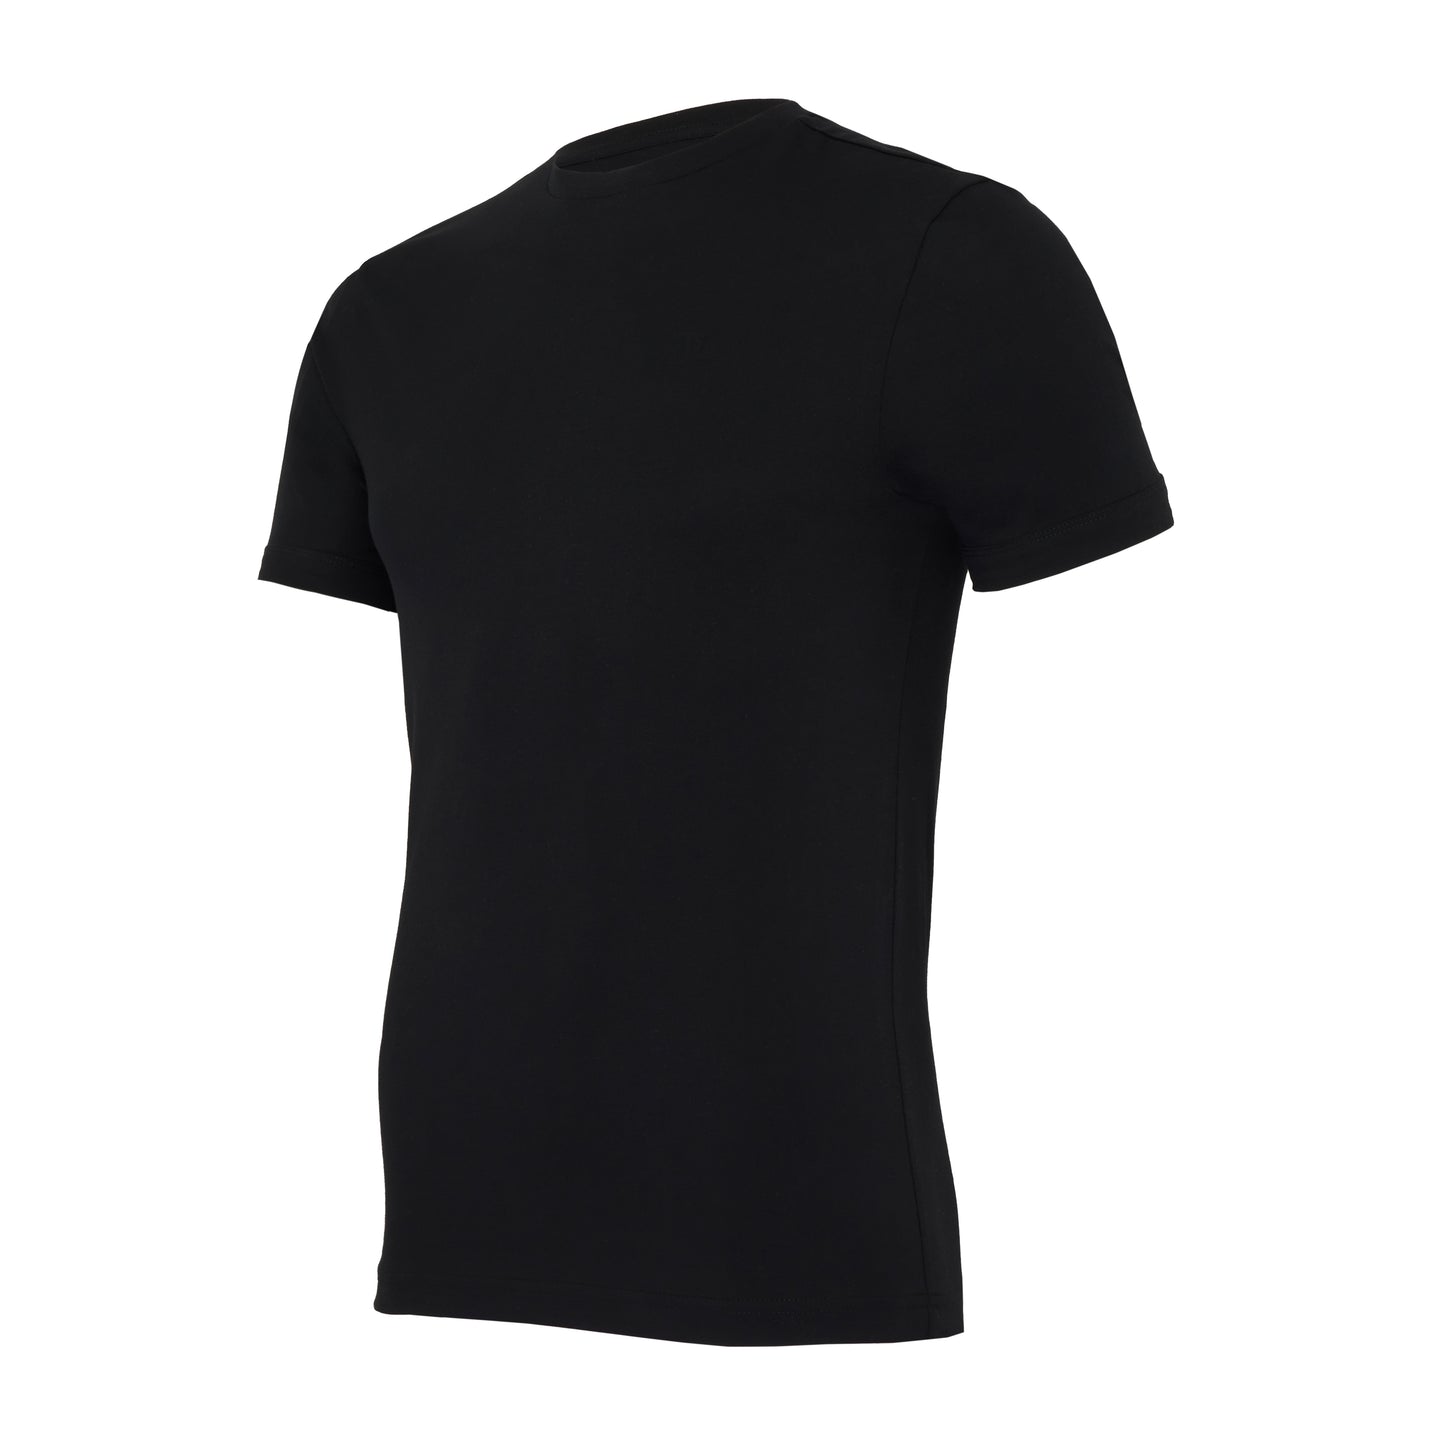 Round tight neck, black, bodyfit T-shirt – pack of 2 or 4 tees